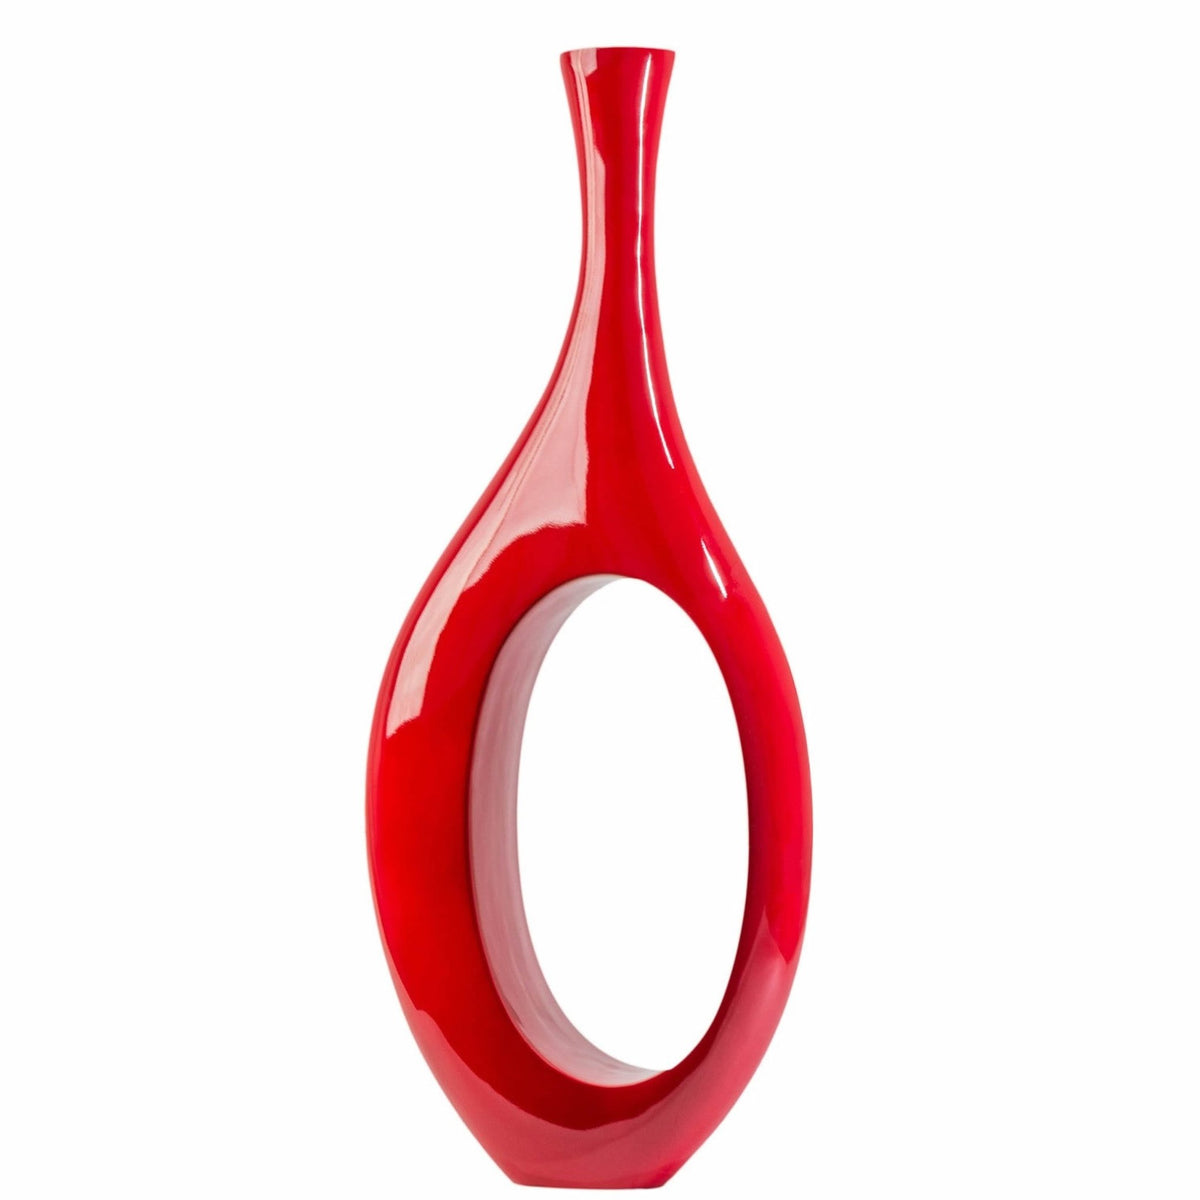 Finesse Decor Trombone Vase in Red / Small